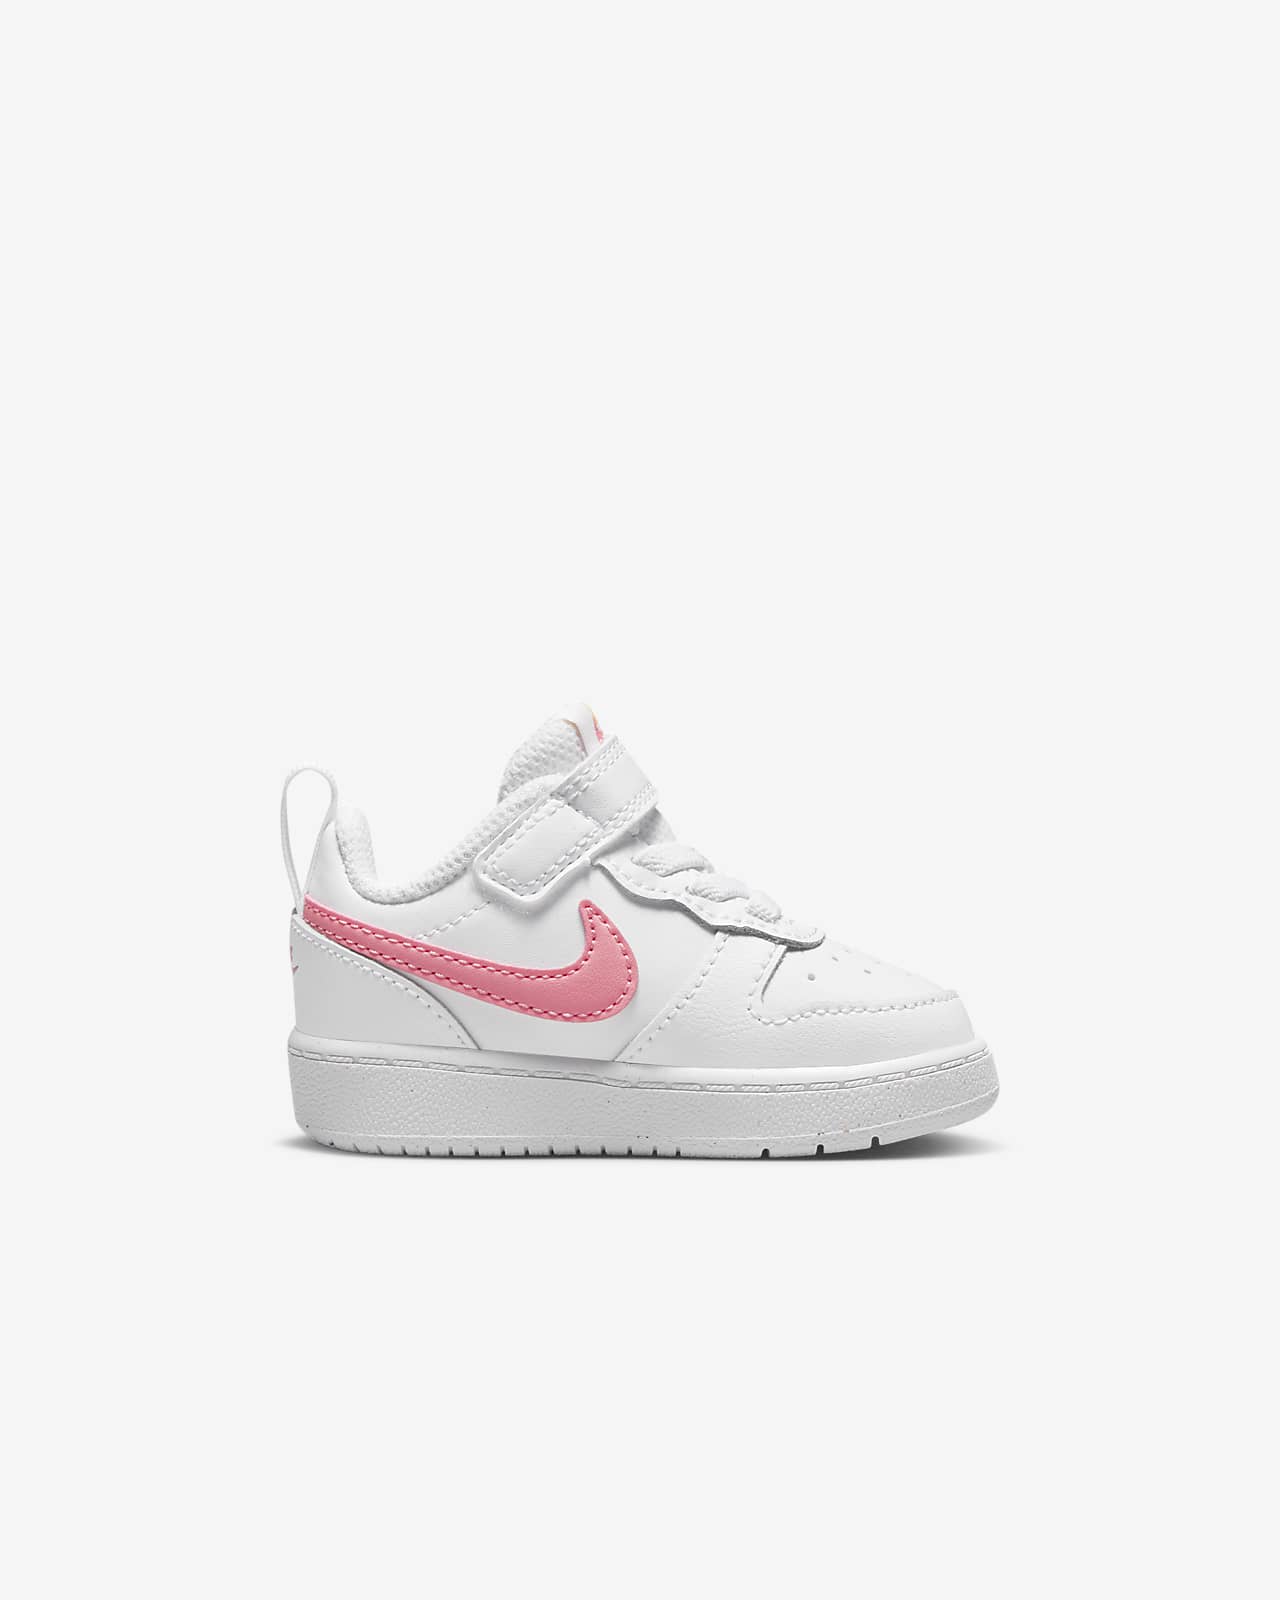 Nike Court Borough Low 2 Baby/Toddler Shoes. Nike ID